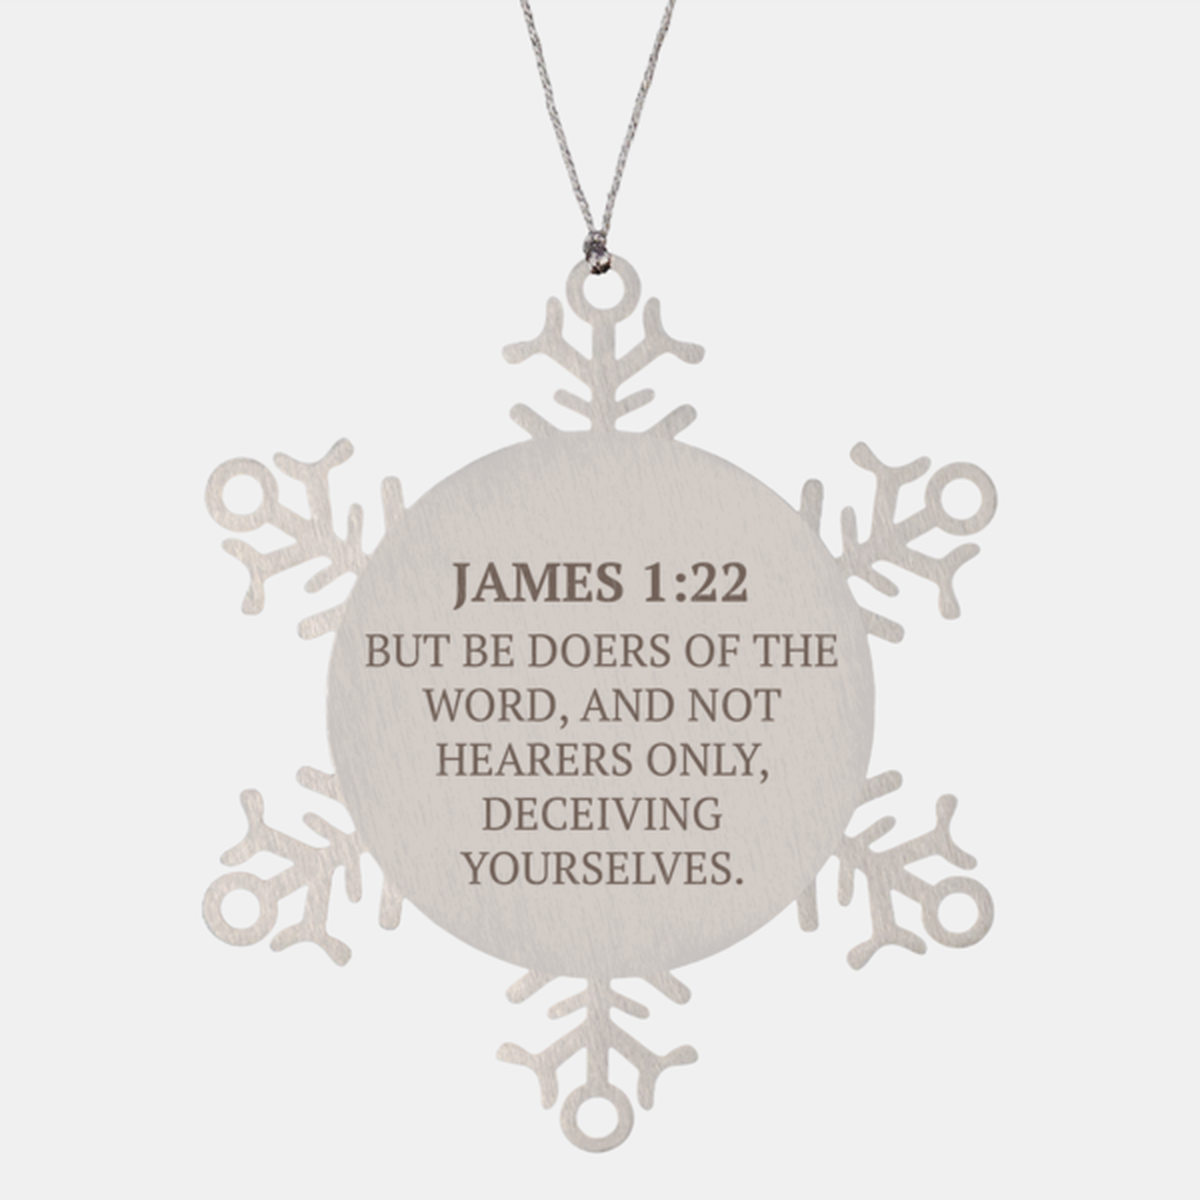 Christian Ornaments For Christmas Tree, But Be Doers Of The Word, And Not Hearers Only, Religious Christmas Decorations, Scripture Ornaments Gifts, Bible Verse Ornament